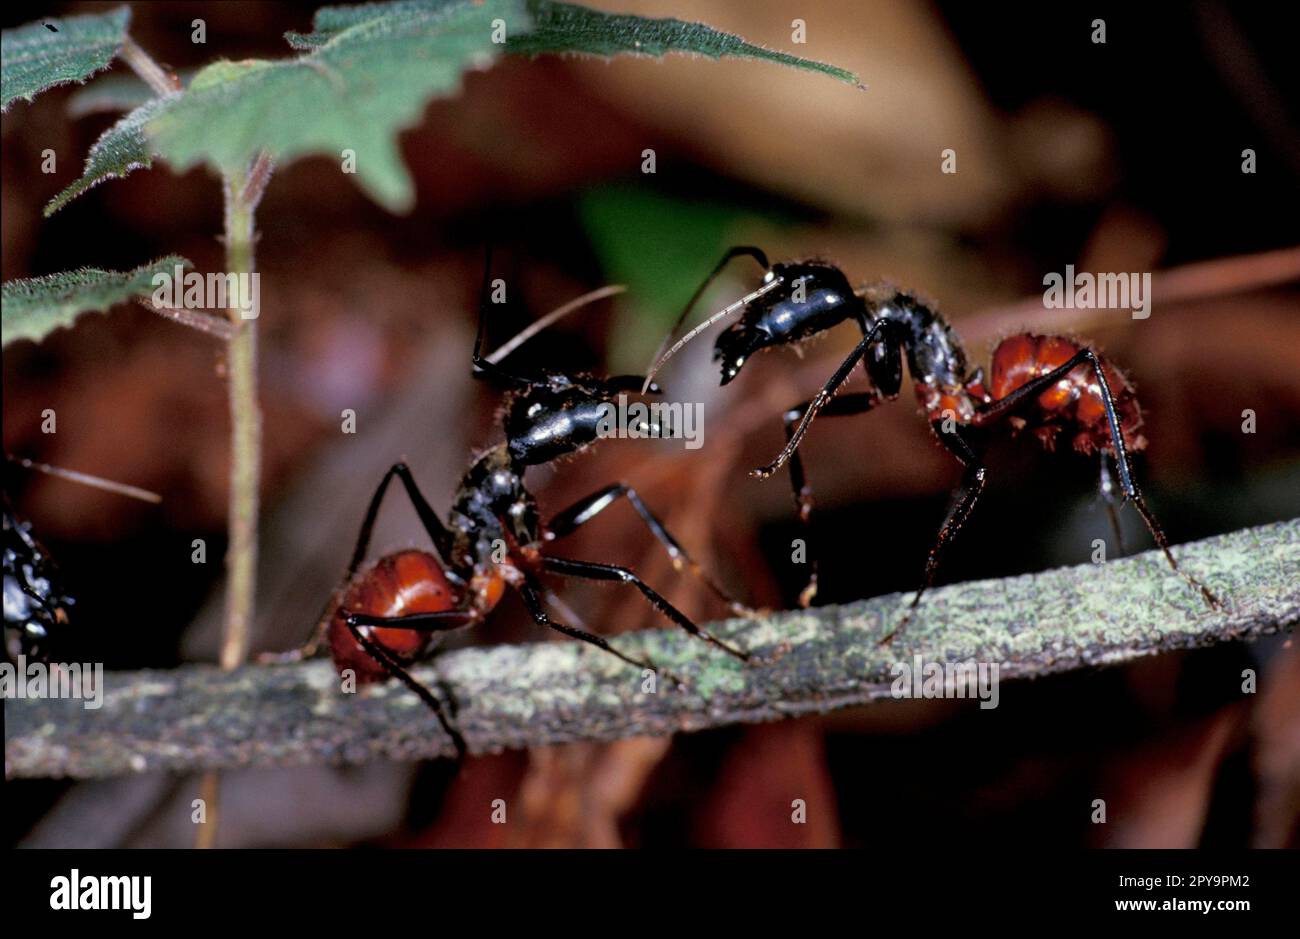 619 Giant Ant Stock Photos, High-Res Pictures, and Images - Getty Images